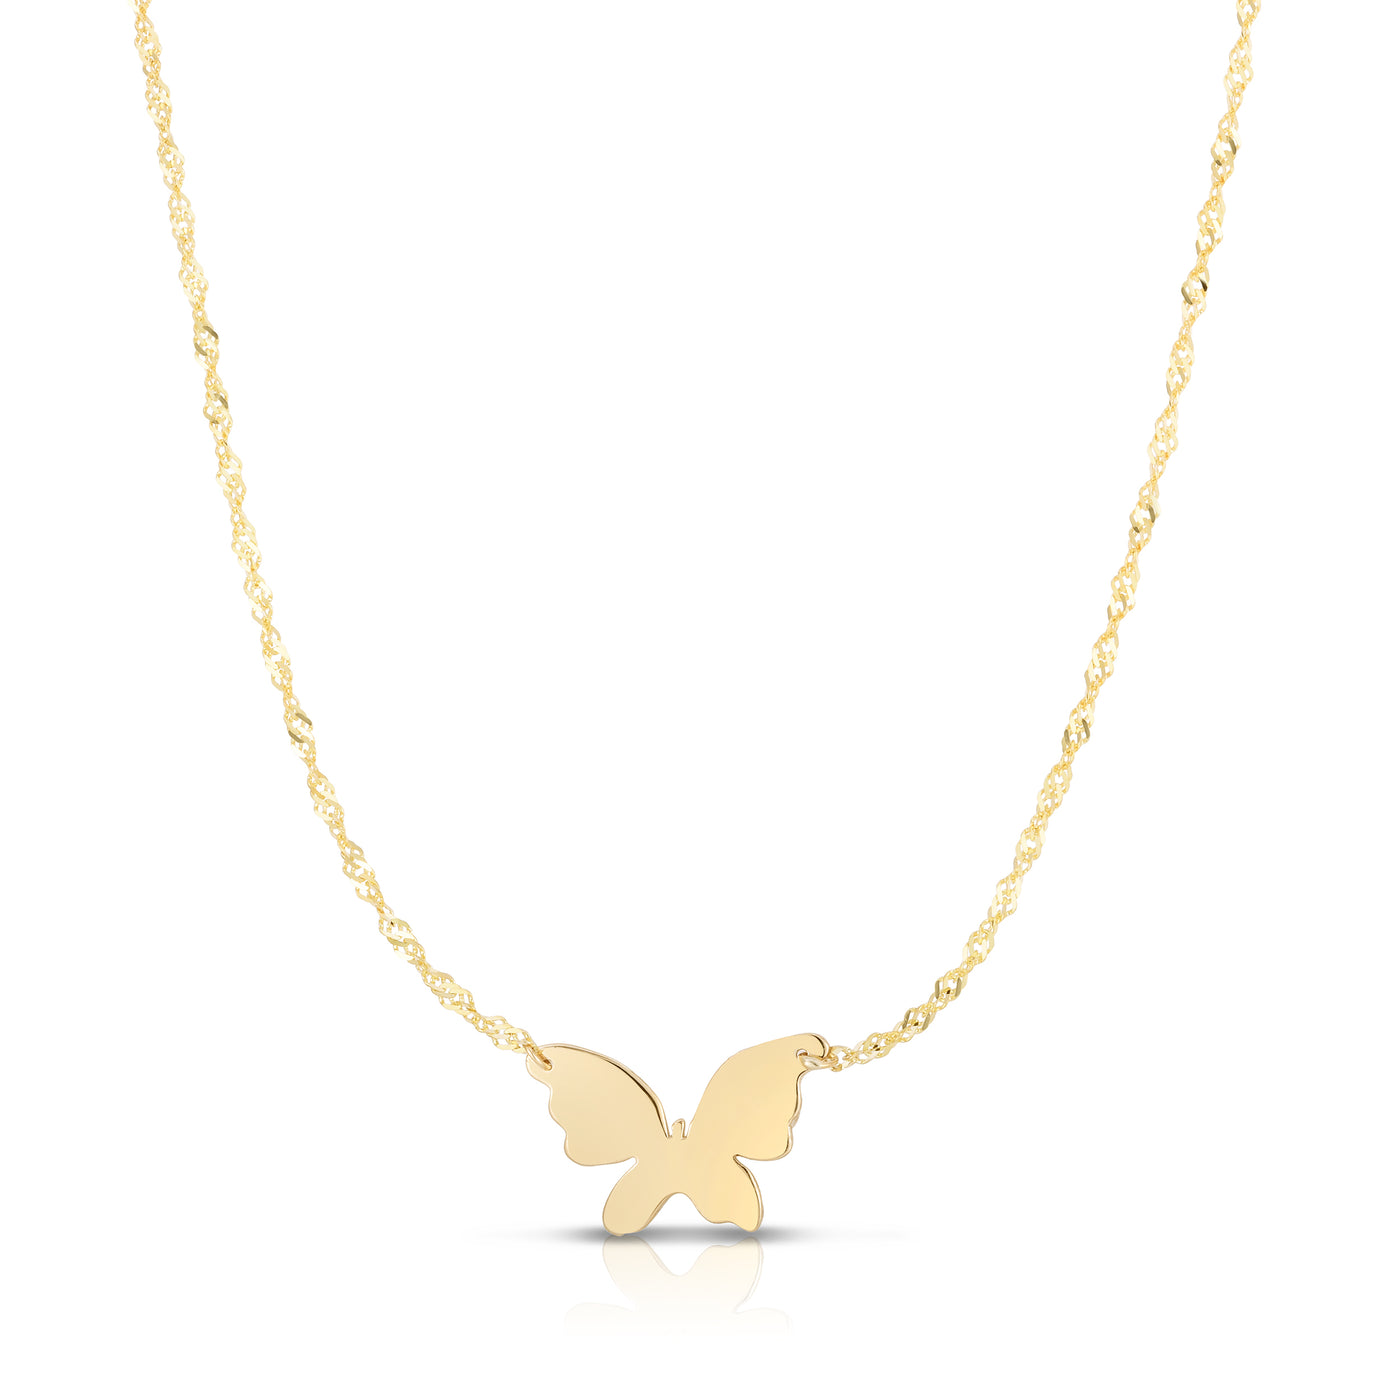 SOPHIA - The Butterfly Necklace